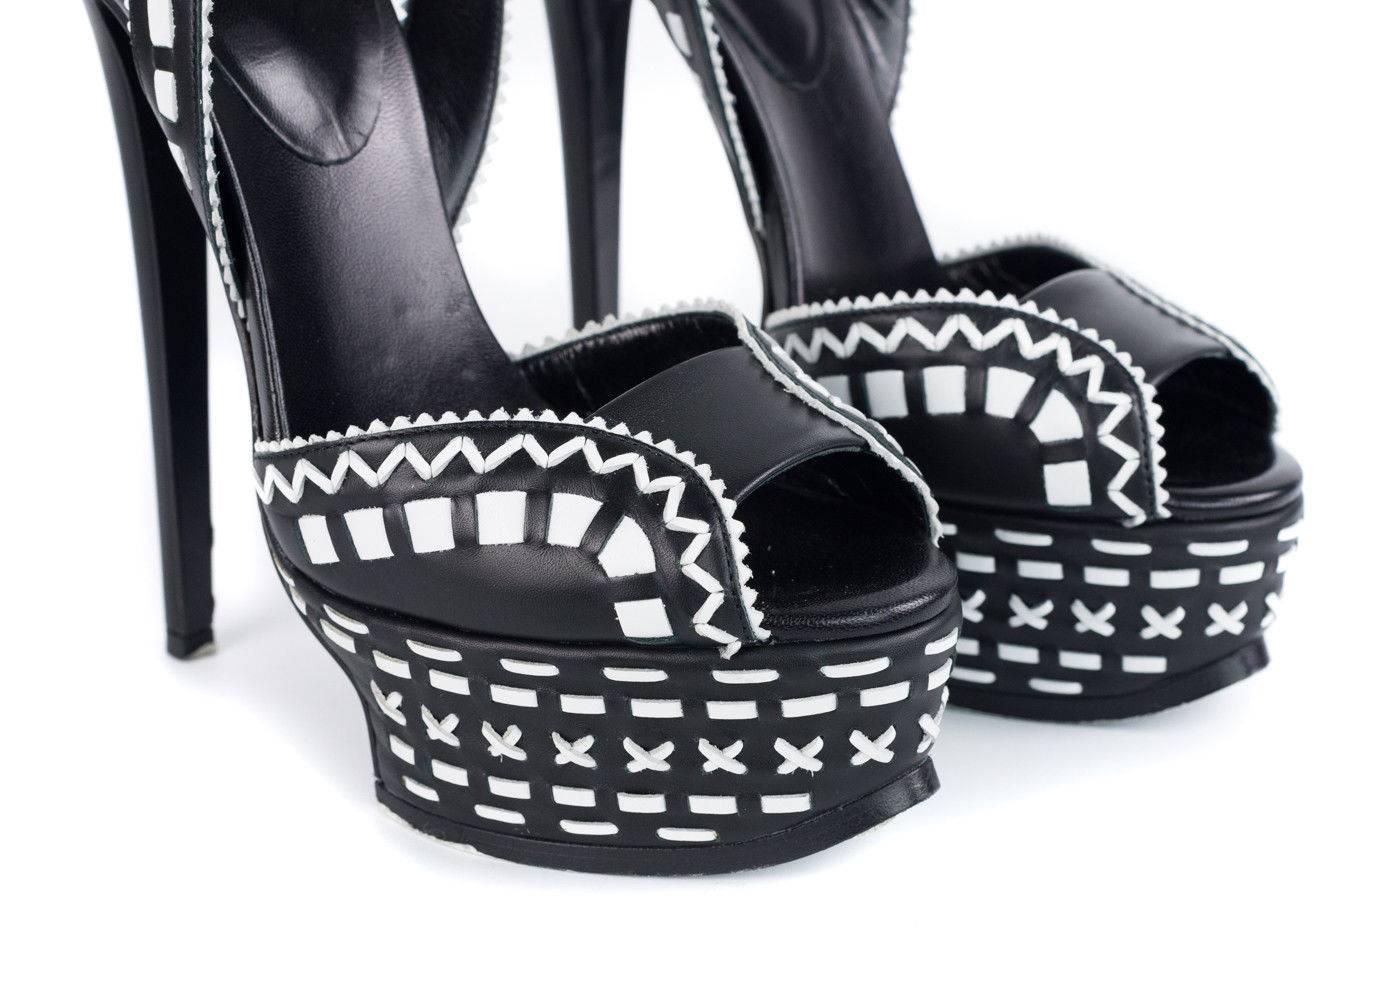 Roberto Cavalli Black & White Patterned Platform Pumps In New Condition For Sale In Brooklyn, NY